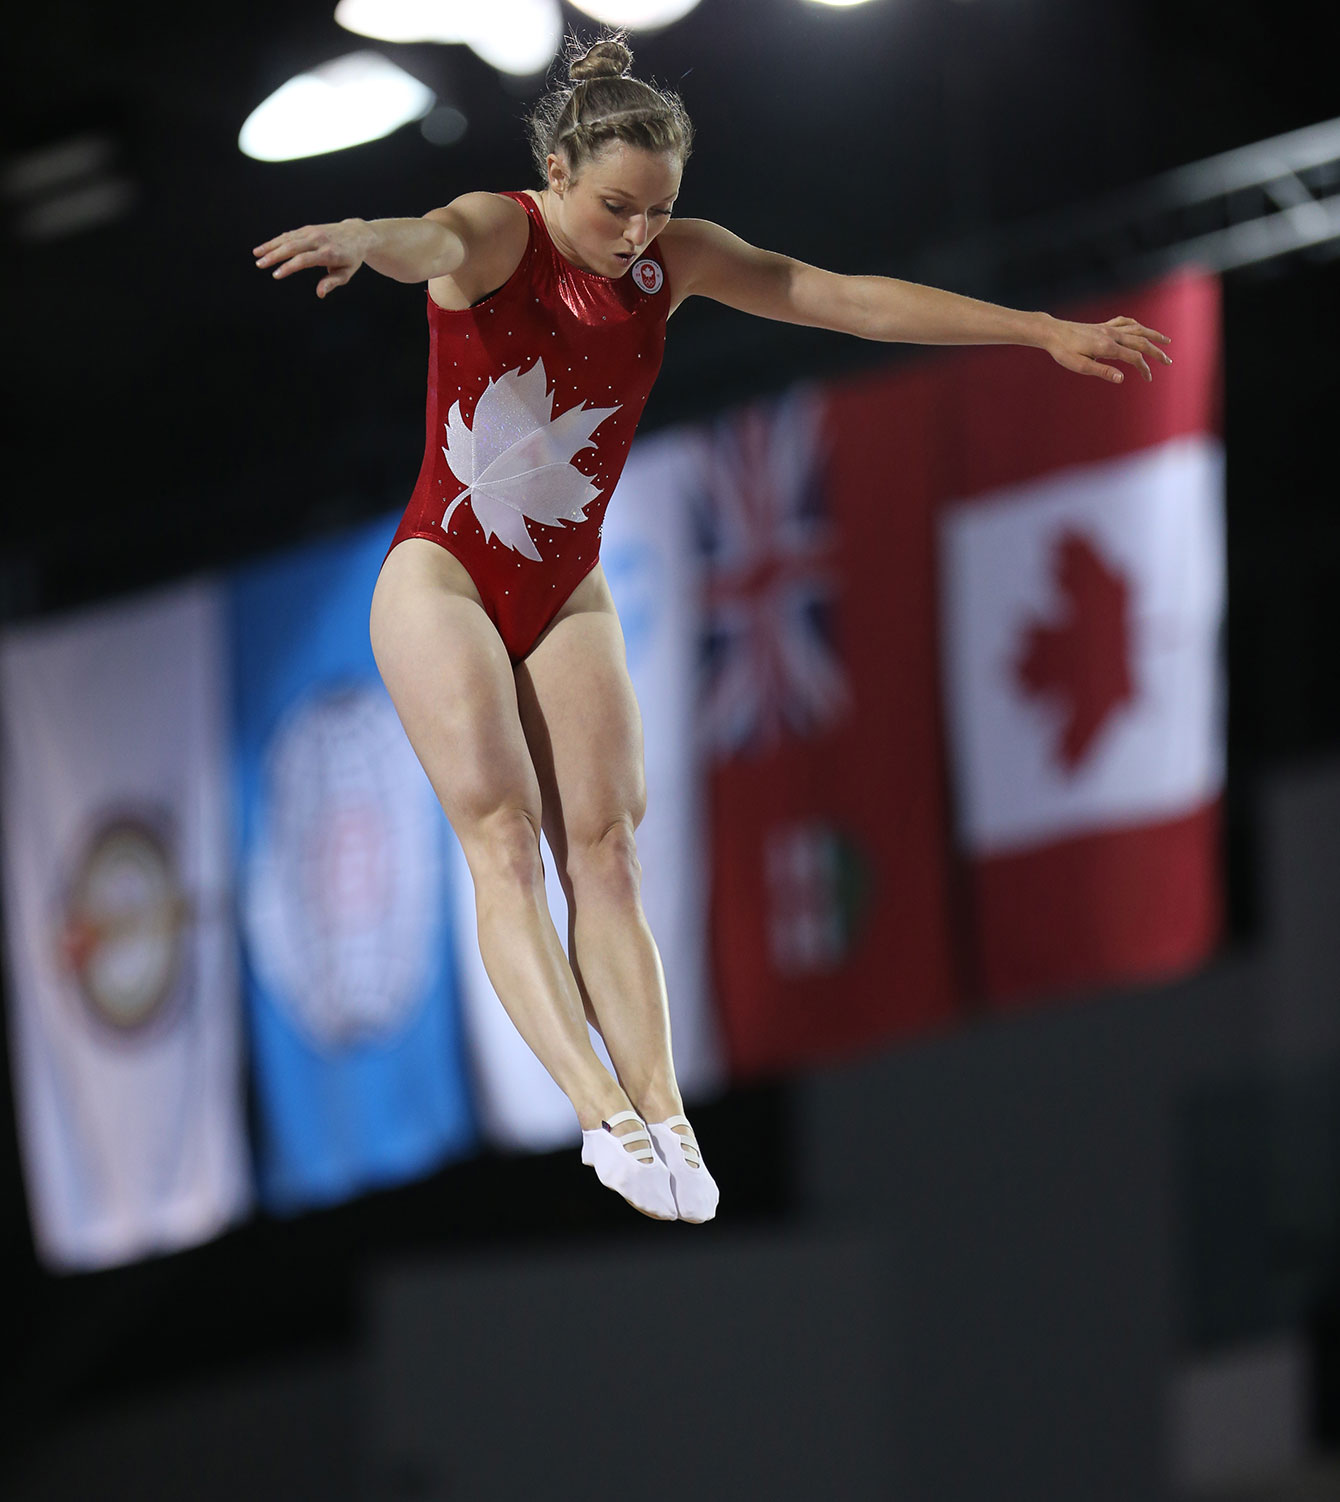 Rosie MacLennan competes in the trampoline at the Toronto 2015 Pan American Games.